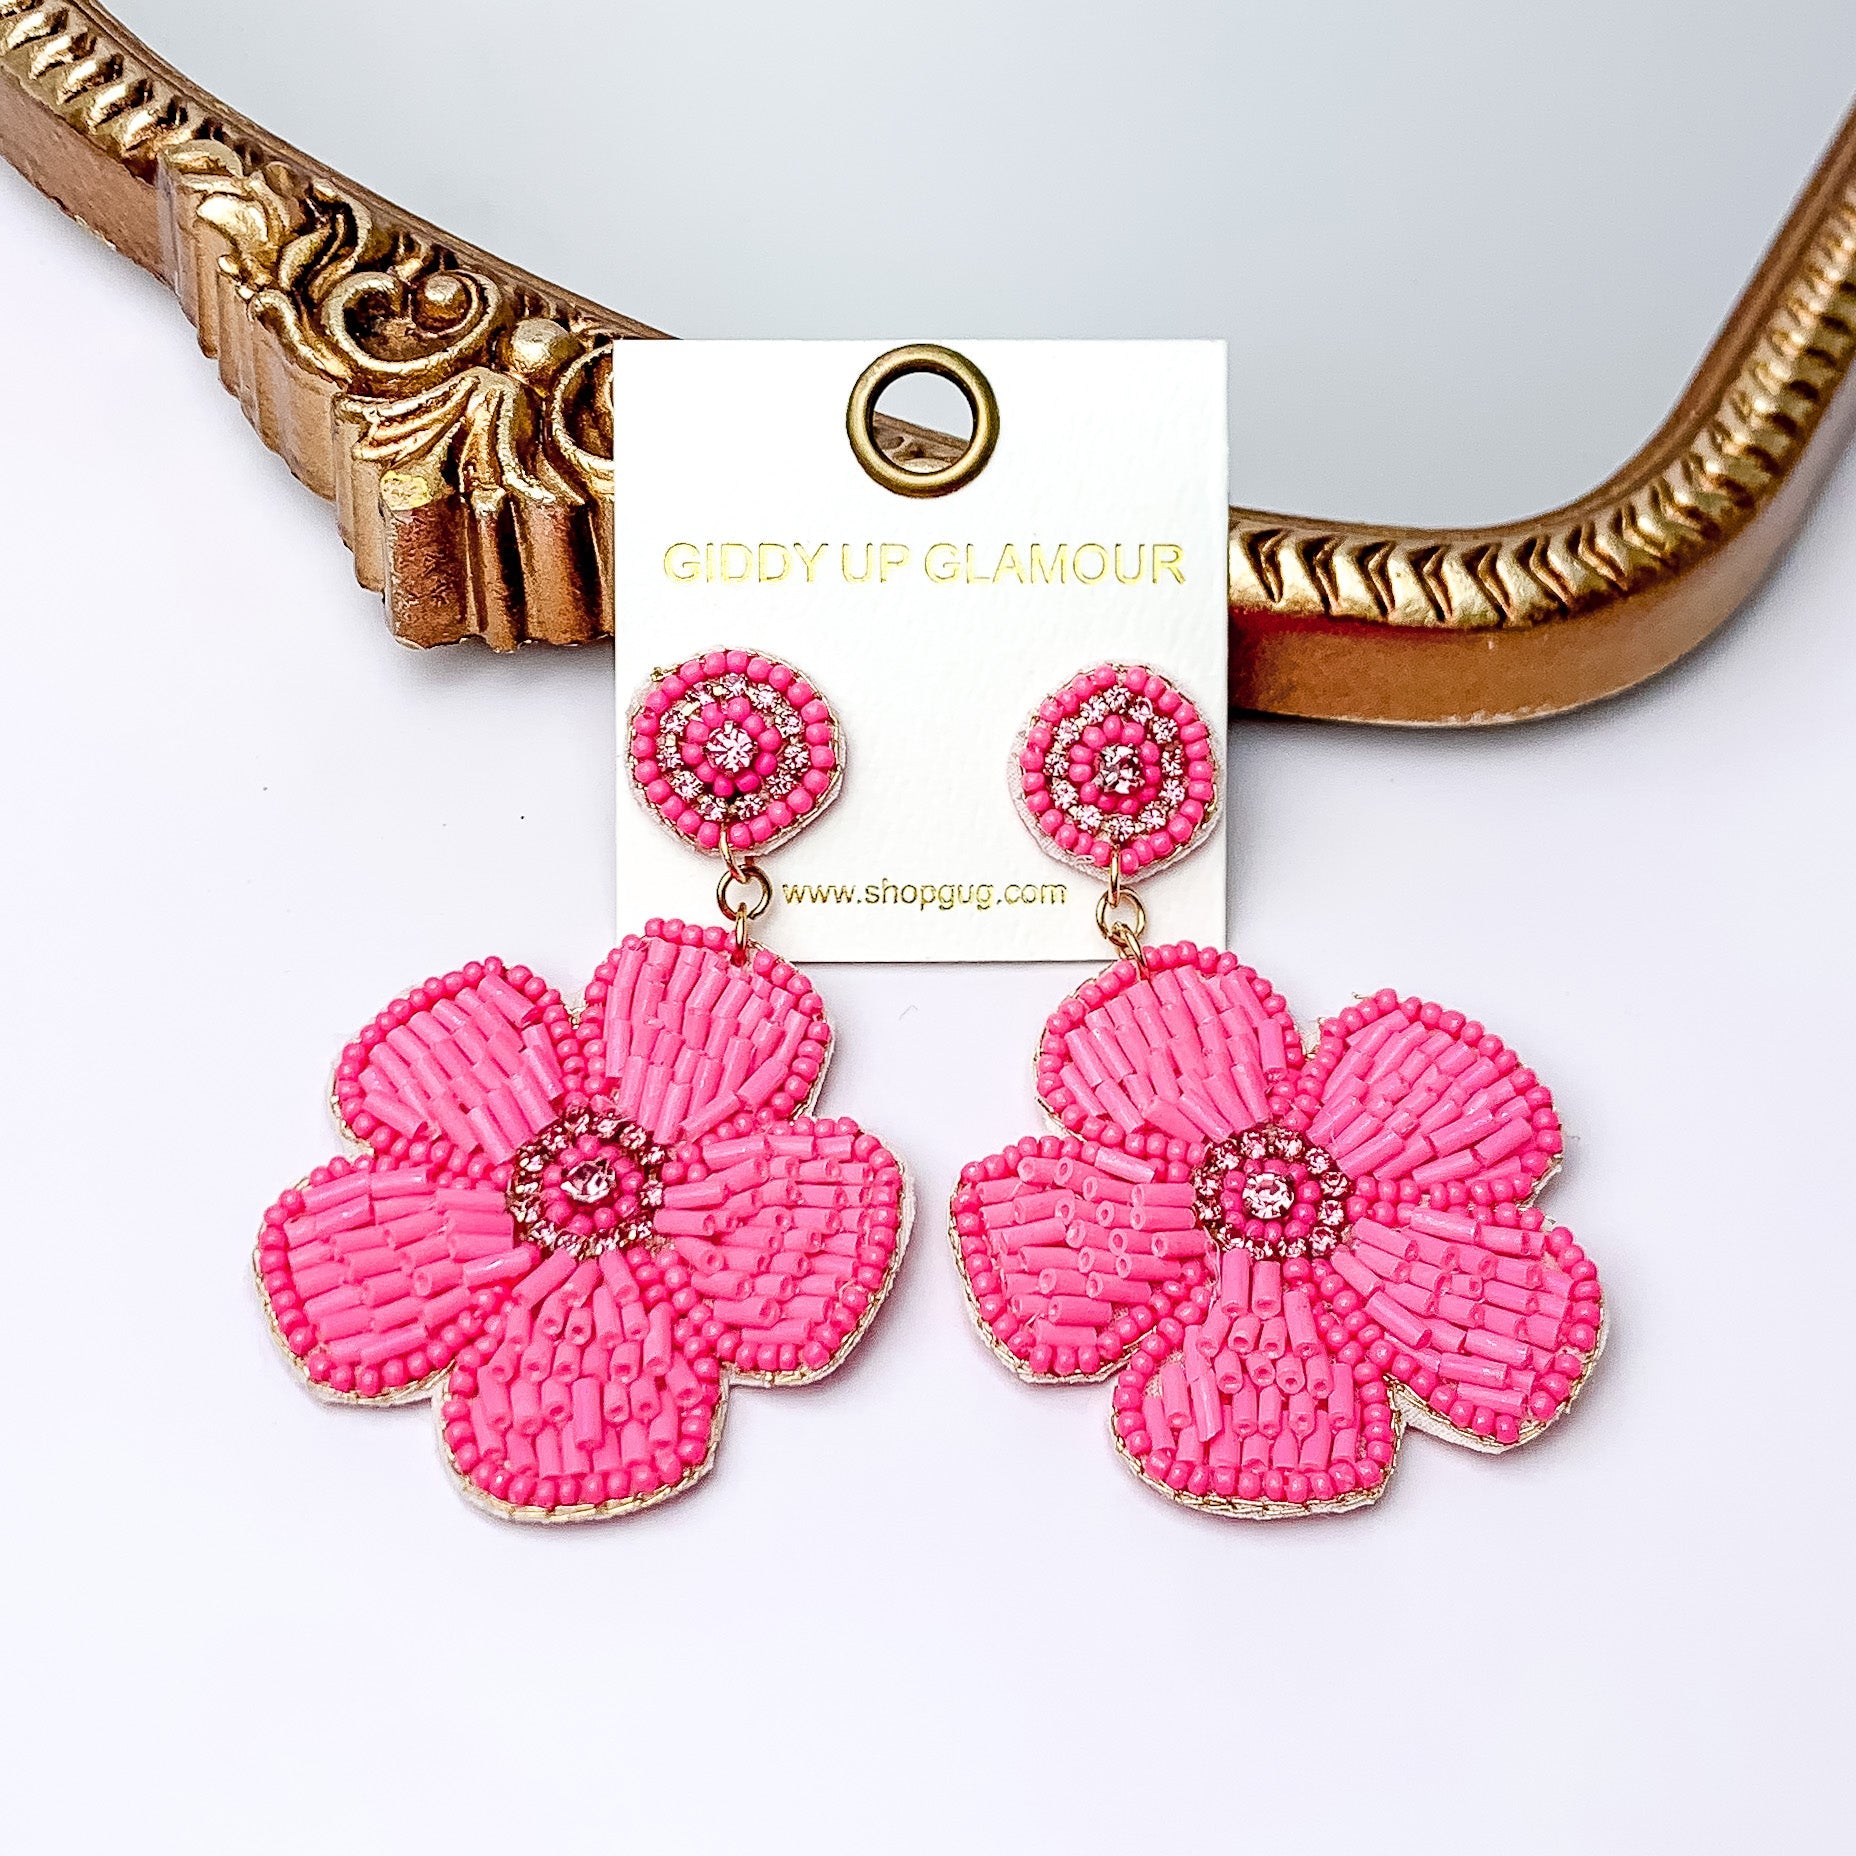 There is hanging beaded flower pendant from the gold stud earrings. The flower pendants are pink with  gold outline and detailing. These earrings are pictured in front of a gold mirror on a white background.